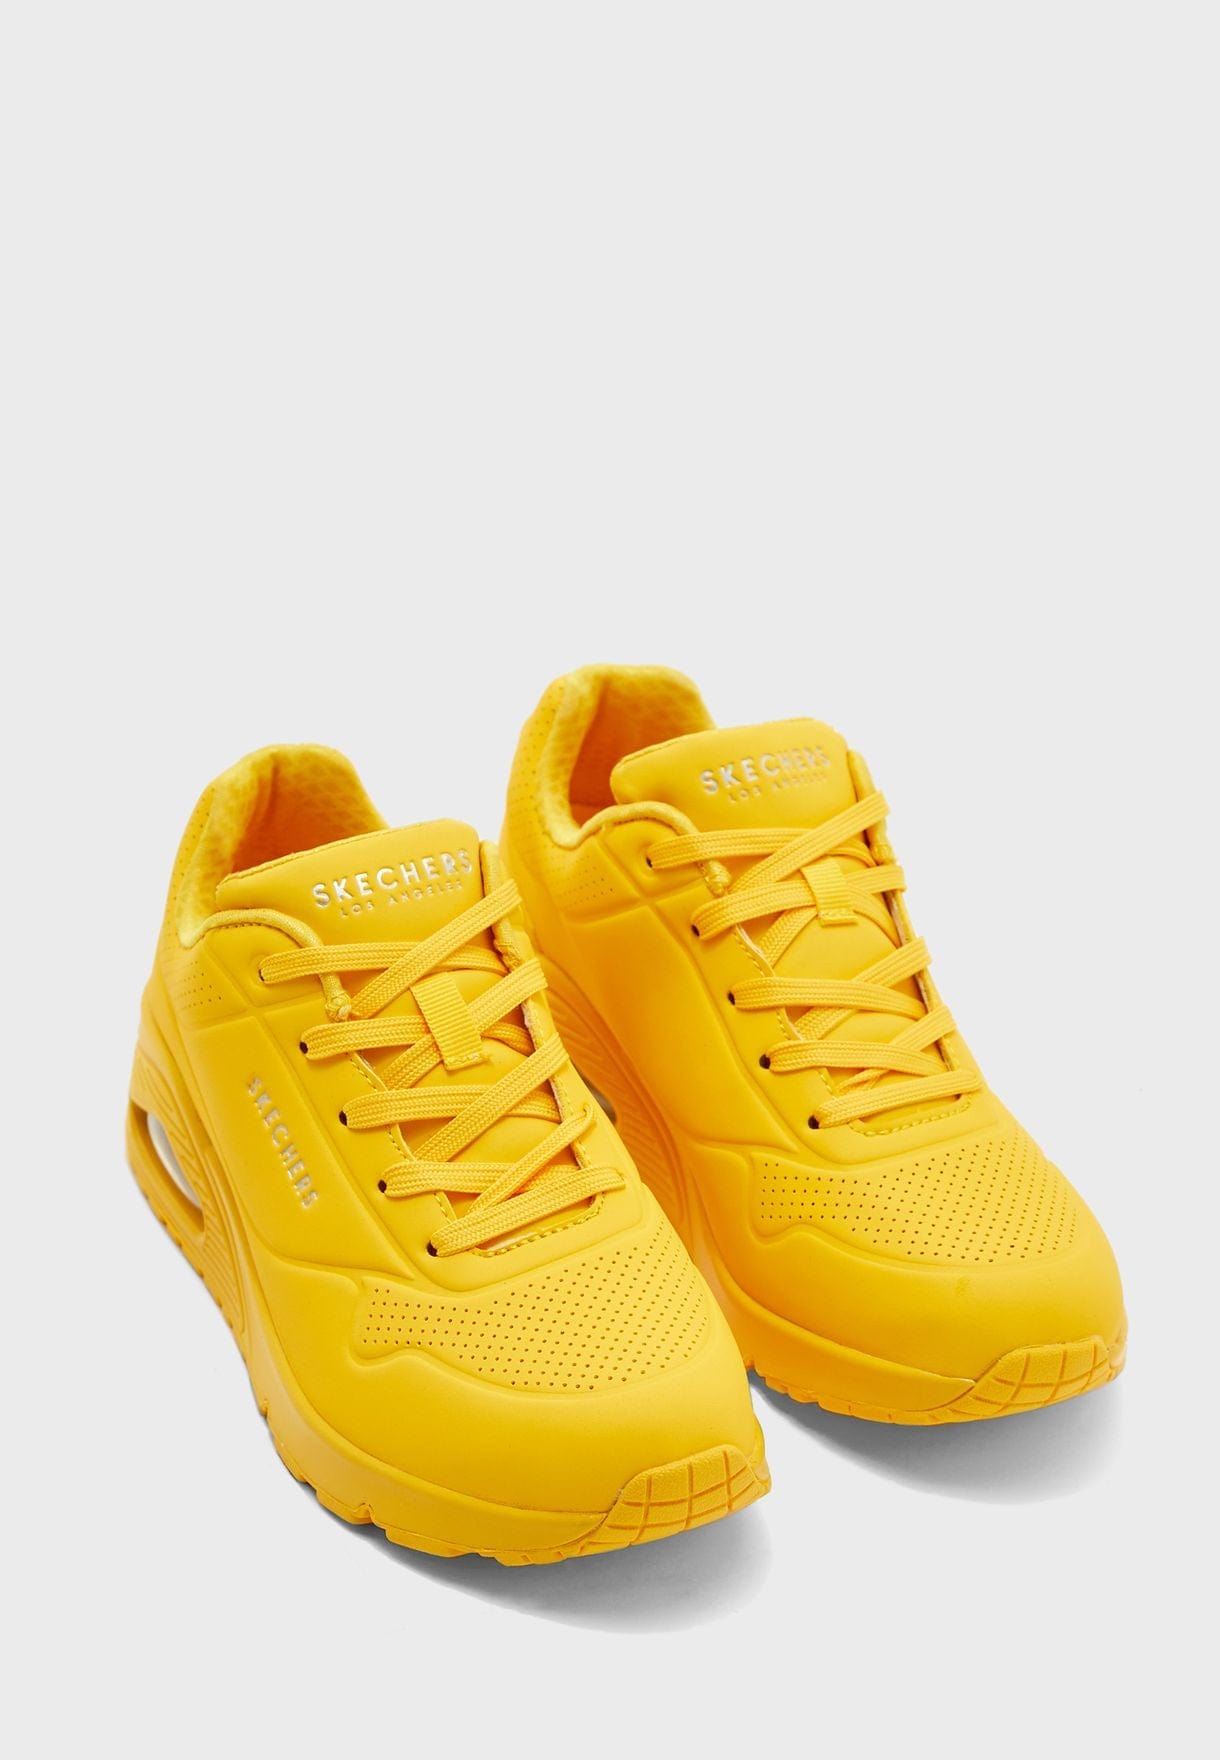 Uno Stand On Air Sneakers Yellow for Sale Lowest Price Guaranteed